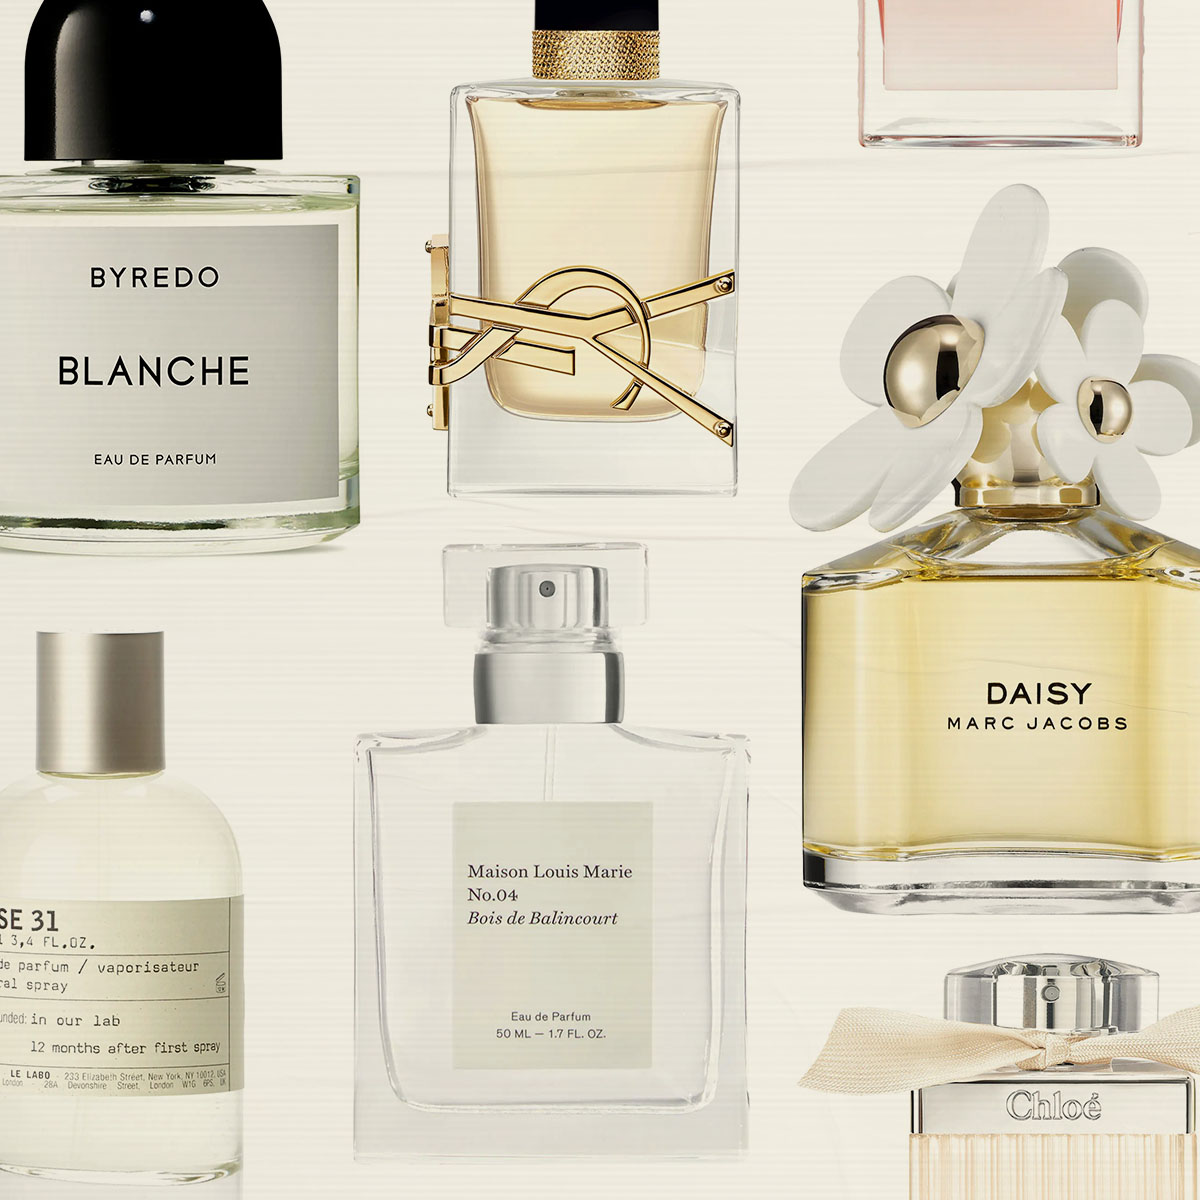 Best Perfumes for Women: 20 Scents for Her to Enjoy on Valentine's Day or  Everyday